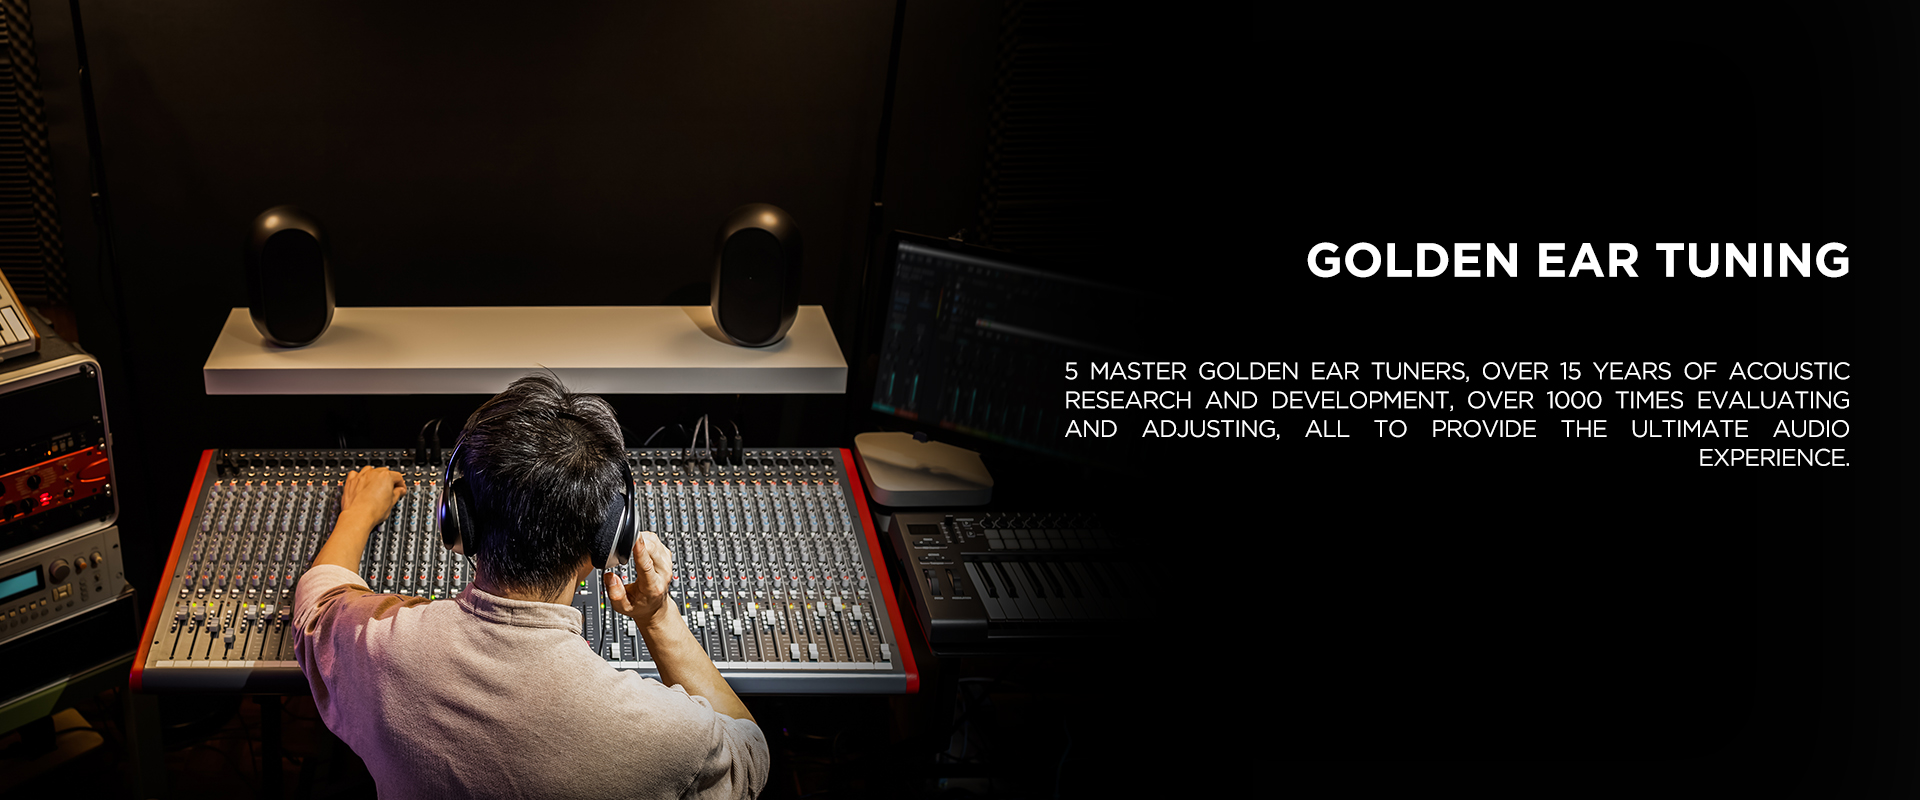 Golden Ear Tuning - 5 master golden ear tuners, over 15 years of acoustic research and development, over 1000 times evaluating and adjusting, all to provide the ultimate audio experience.